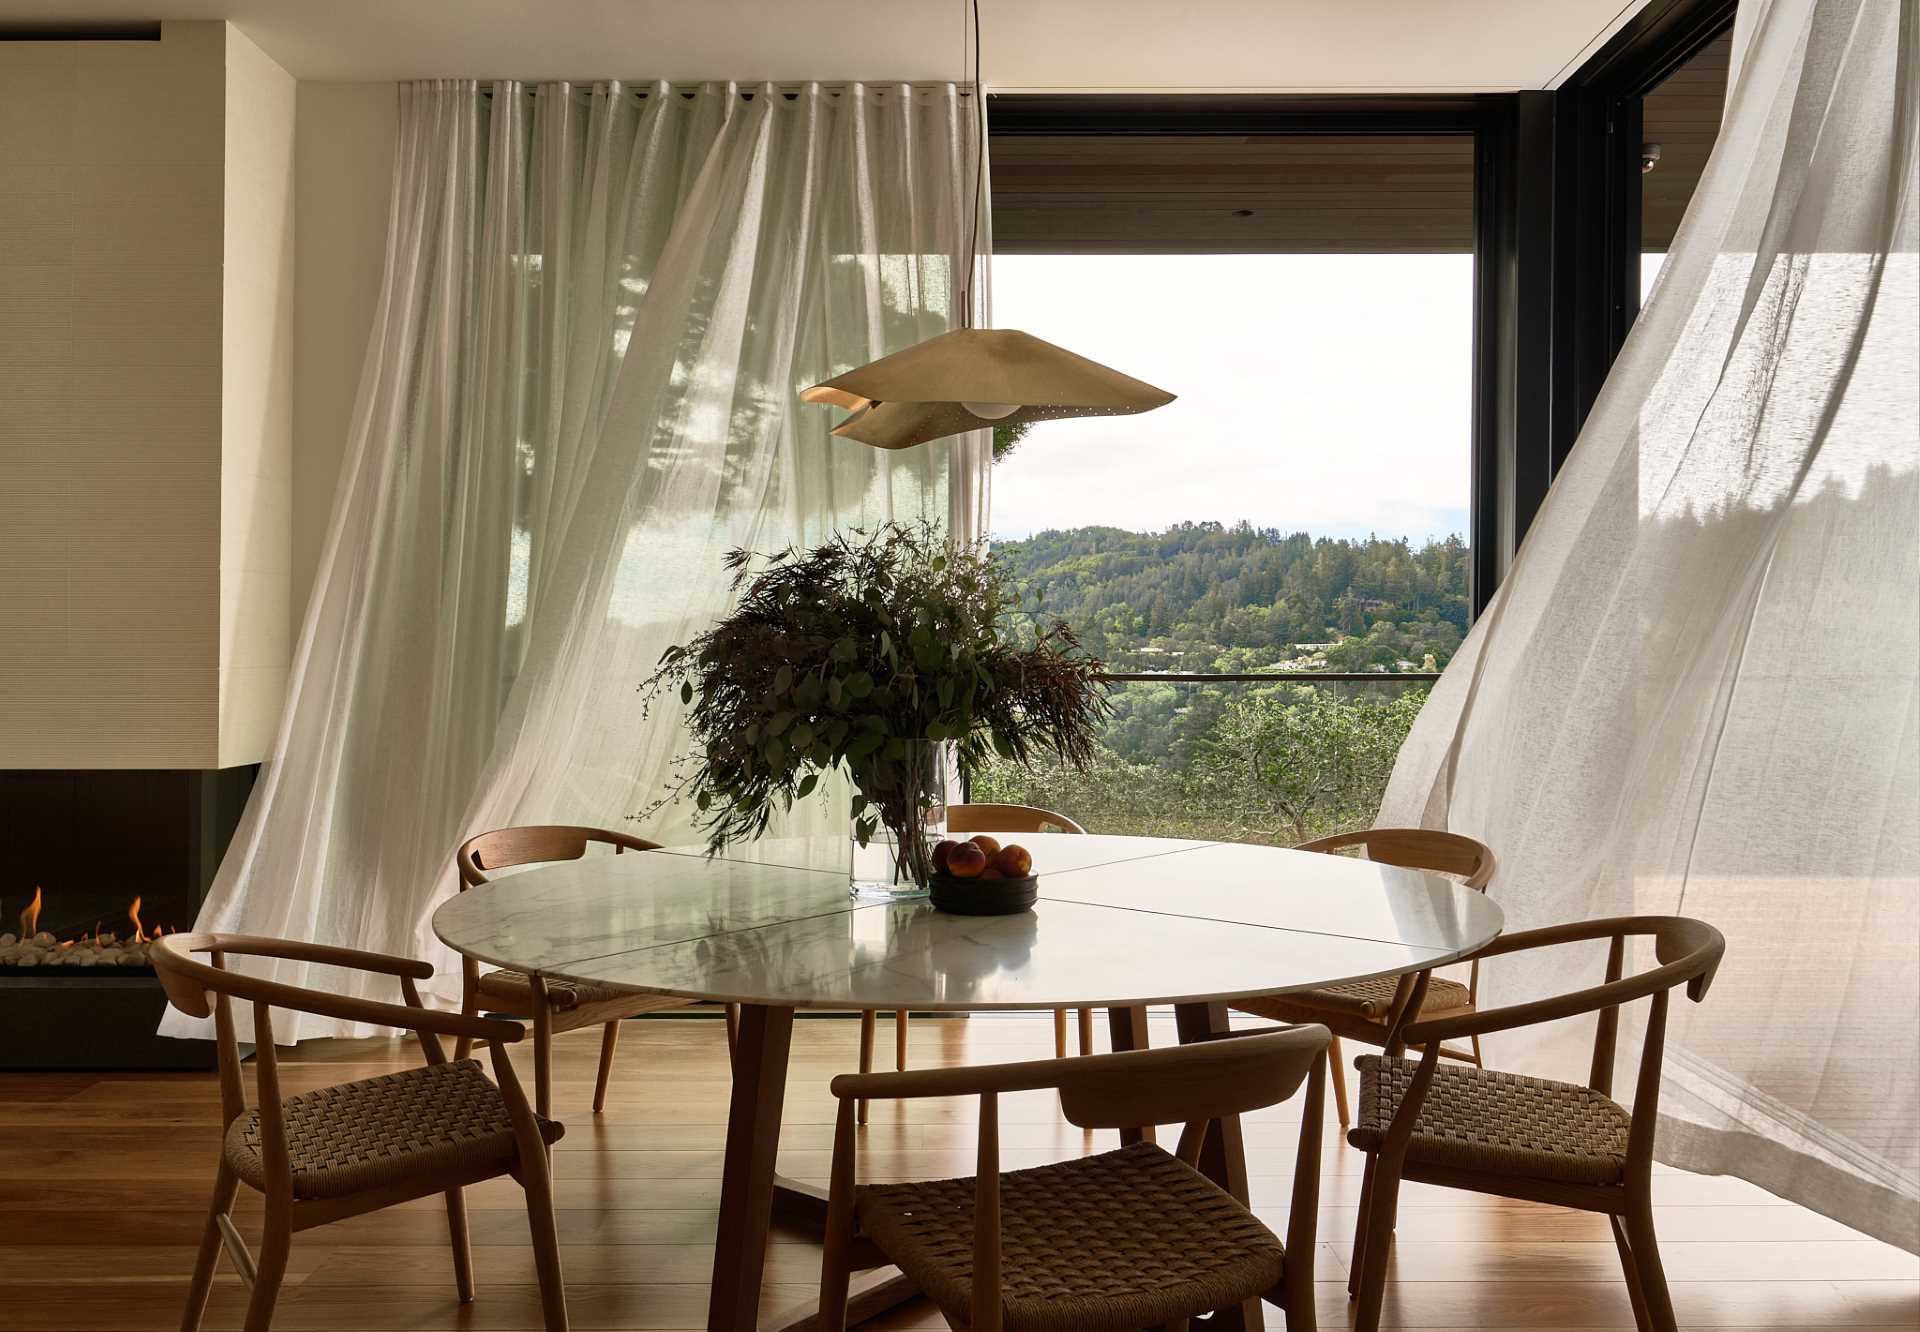 A casual dining area is positioned by sliding glass doors that open to the balcony.